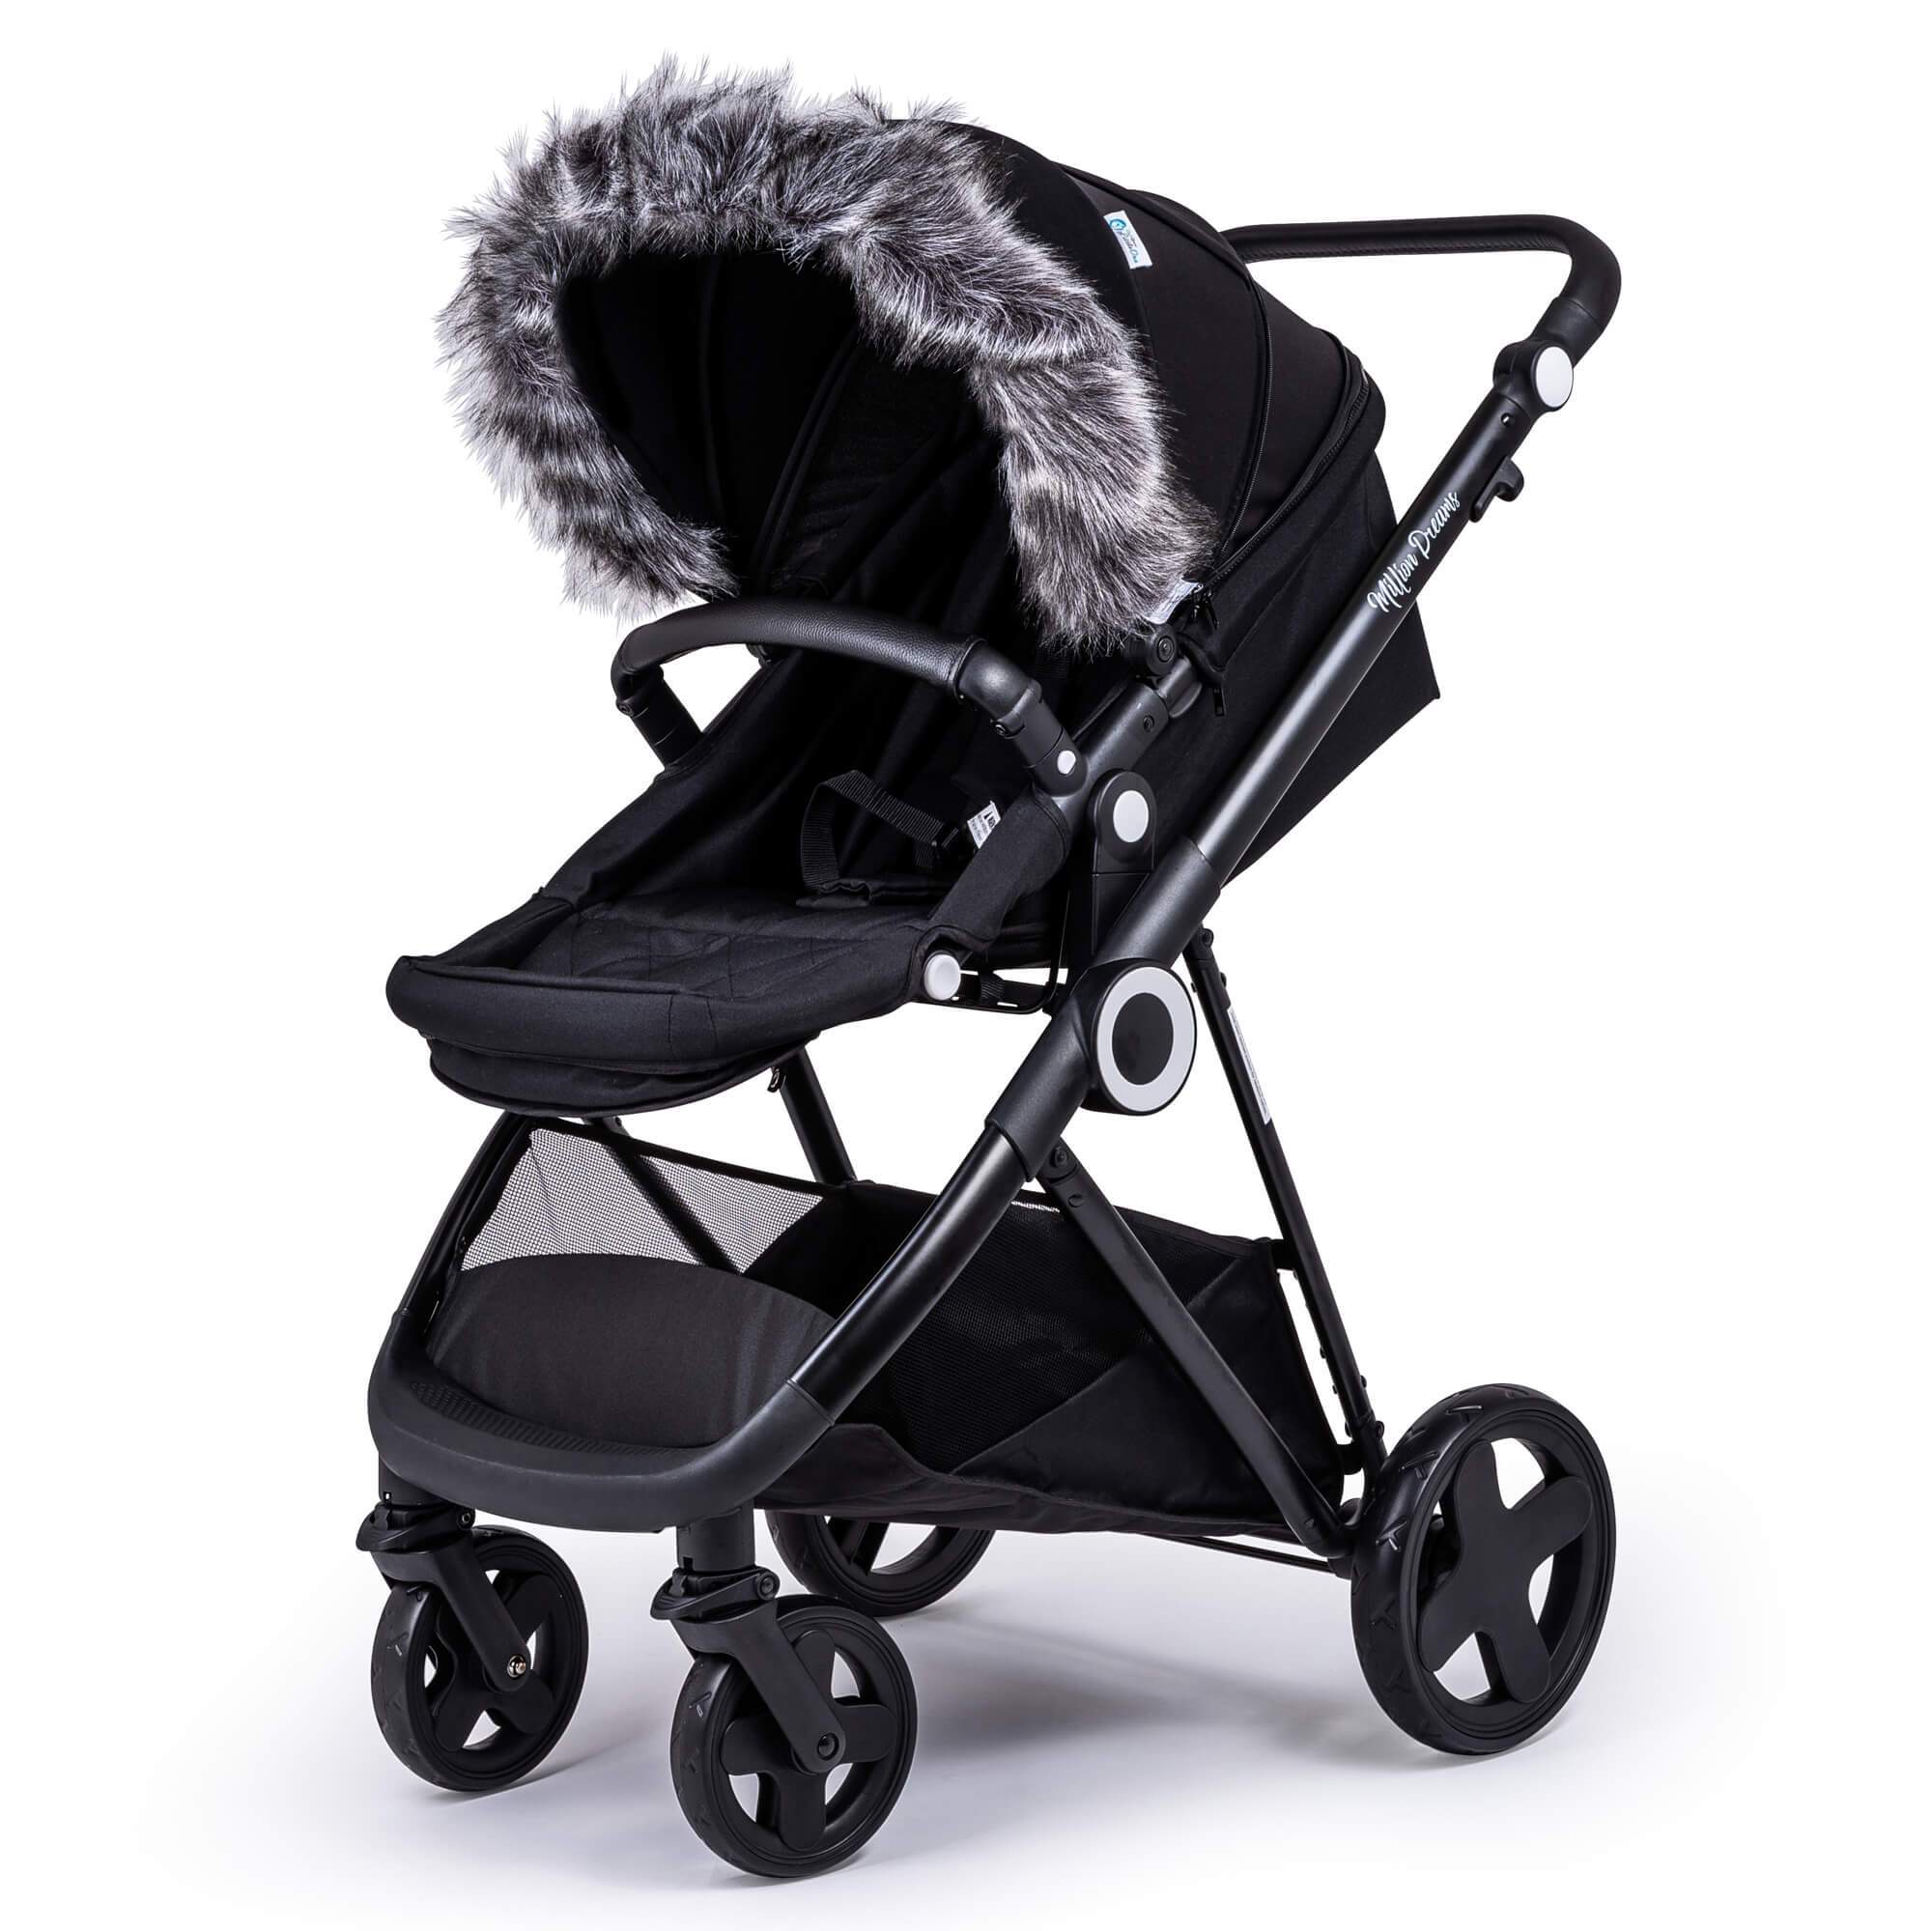 Pram Fur Hood Trim Attachment for Pushchair Compatible with Cam - Dark Grey / Fits All Models | For Your Little One